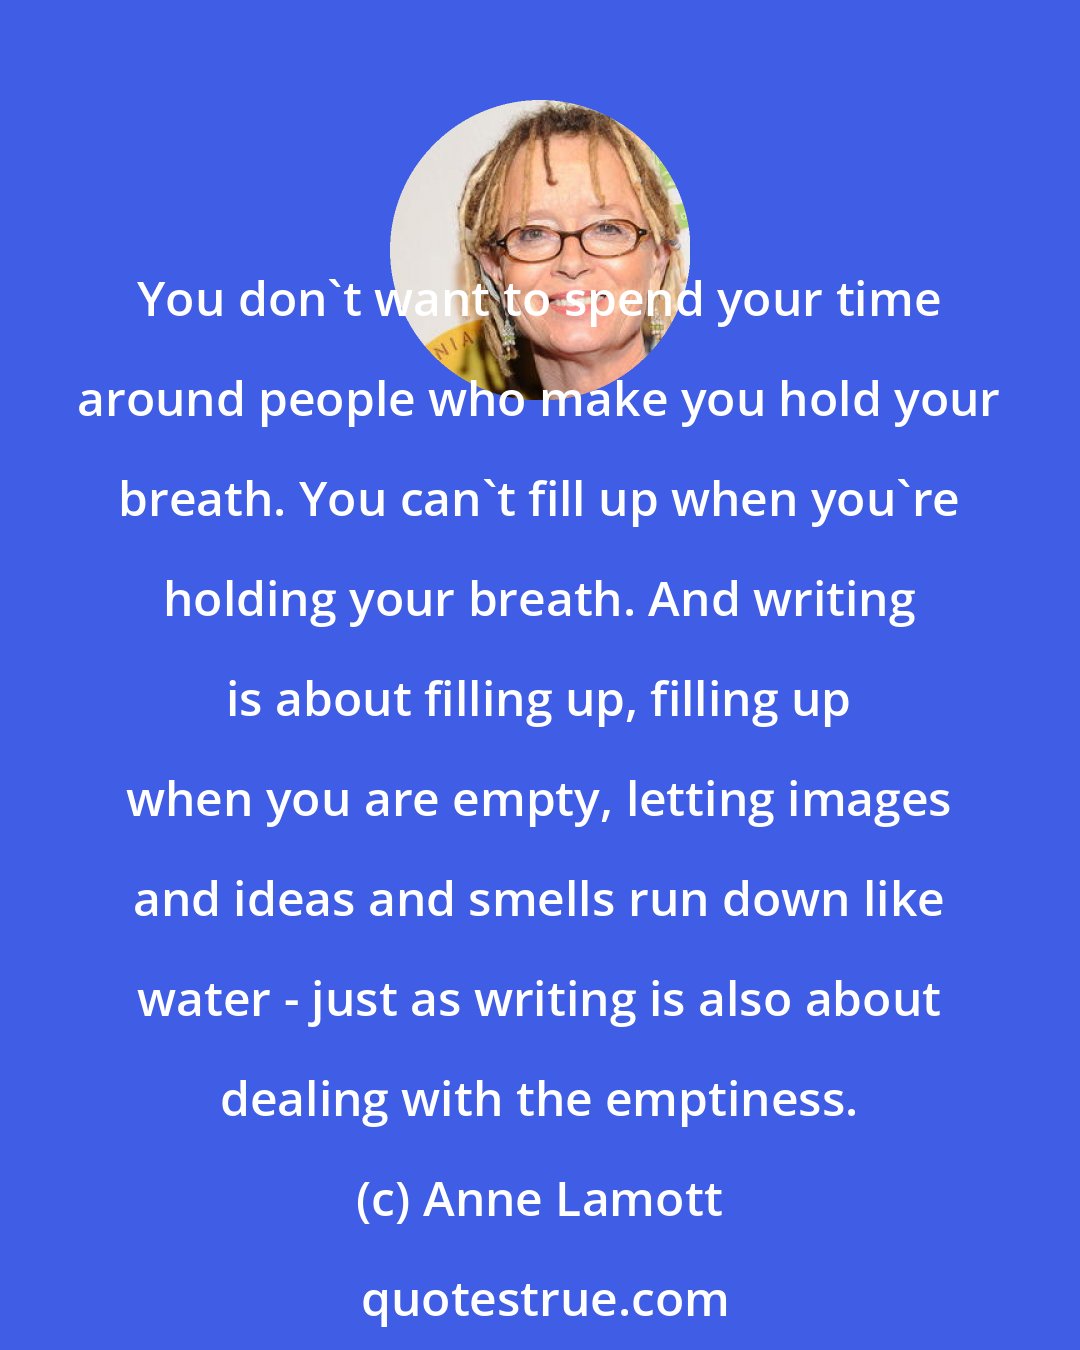 Anne Lamott: You don't want to spend your time around people who make you hold your breath. You can't fill up when you're holding your breath. And writing is about filling up, filling up when you are empty, letting images and ideas and smells run down like water - just as writing is also about dealing with the emptiness.